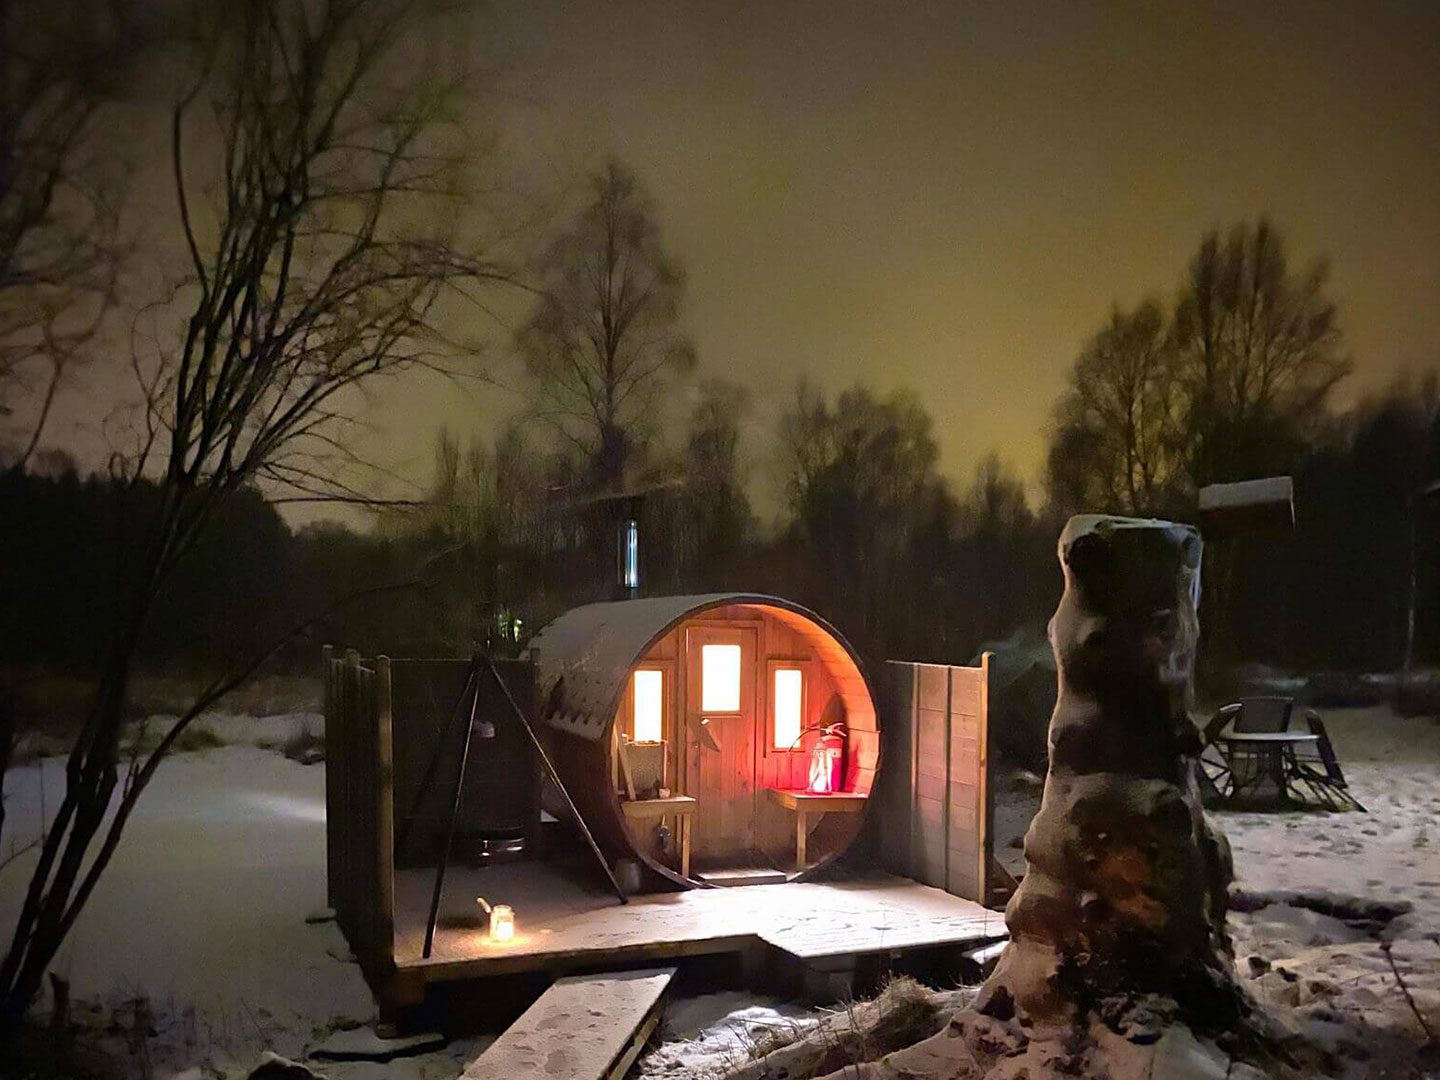 A picture taken outside in the norwegian wilderness with snow and a round wooden cylinder sauna lit up from the inside